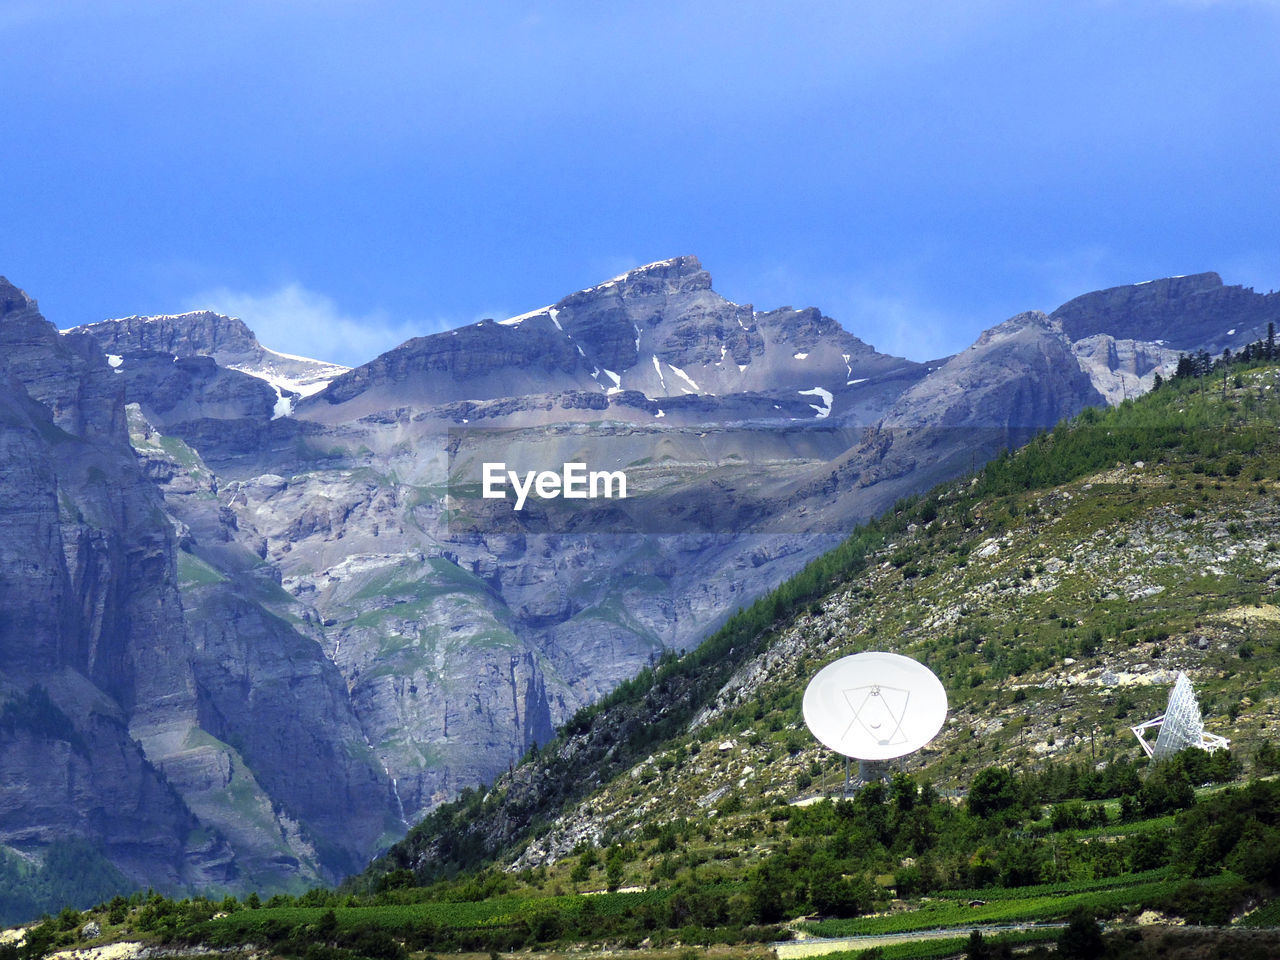 Satterlite dishes oon mountainscape in europe communication technologies